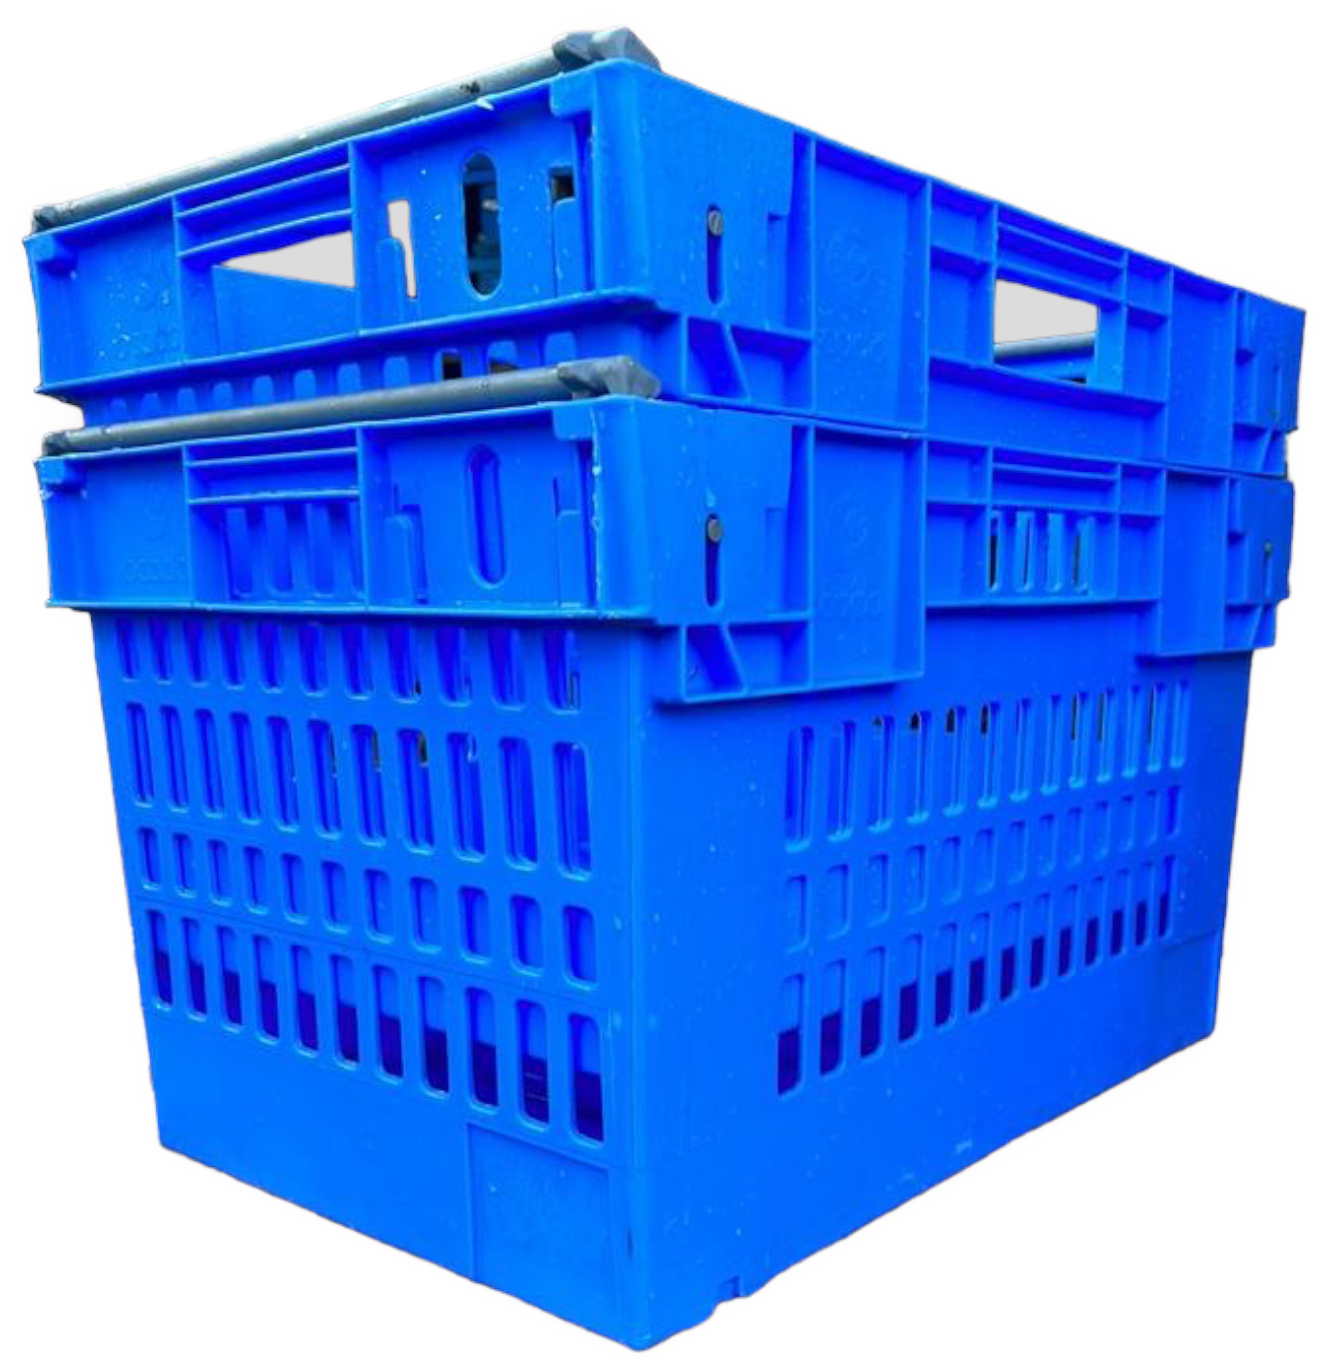 400x300x185 Bale Arm Crate Black 15LTR - Pack of 14 For Logistic Industry